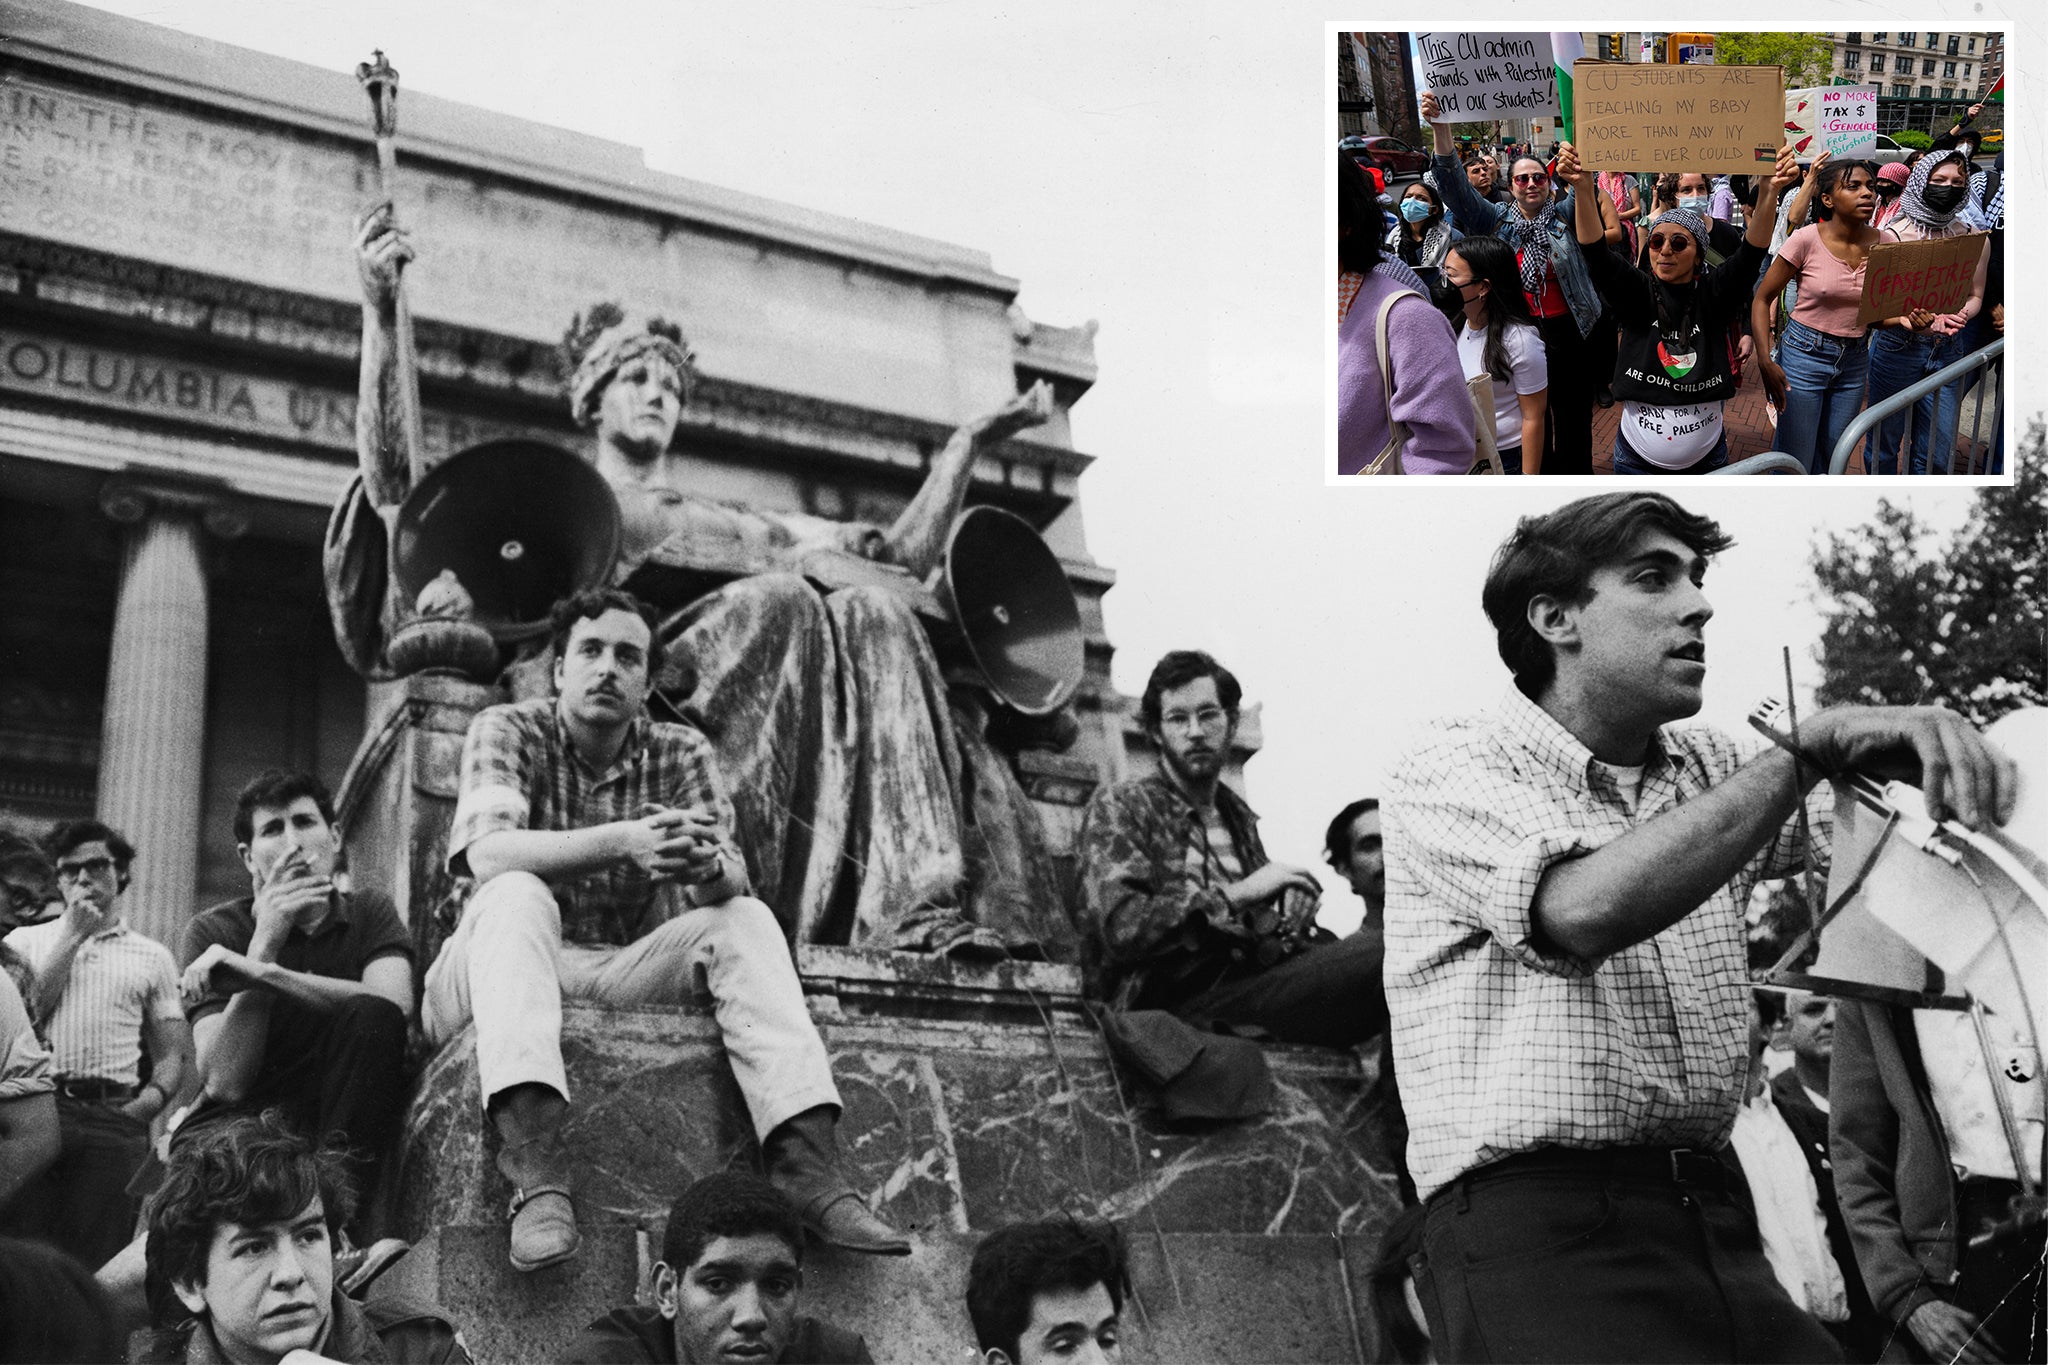 They say you want a revolution: Columbia university protests in 1968, and, inset, today